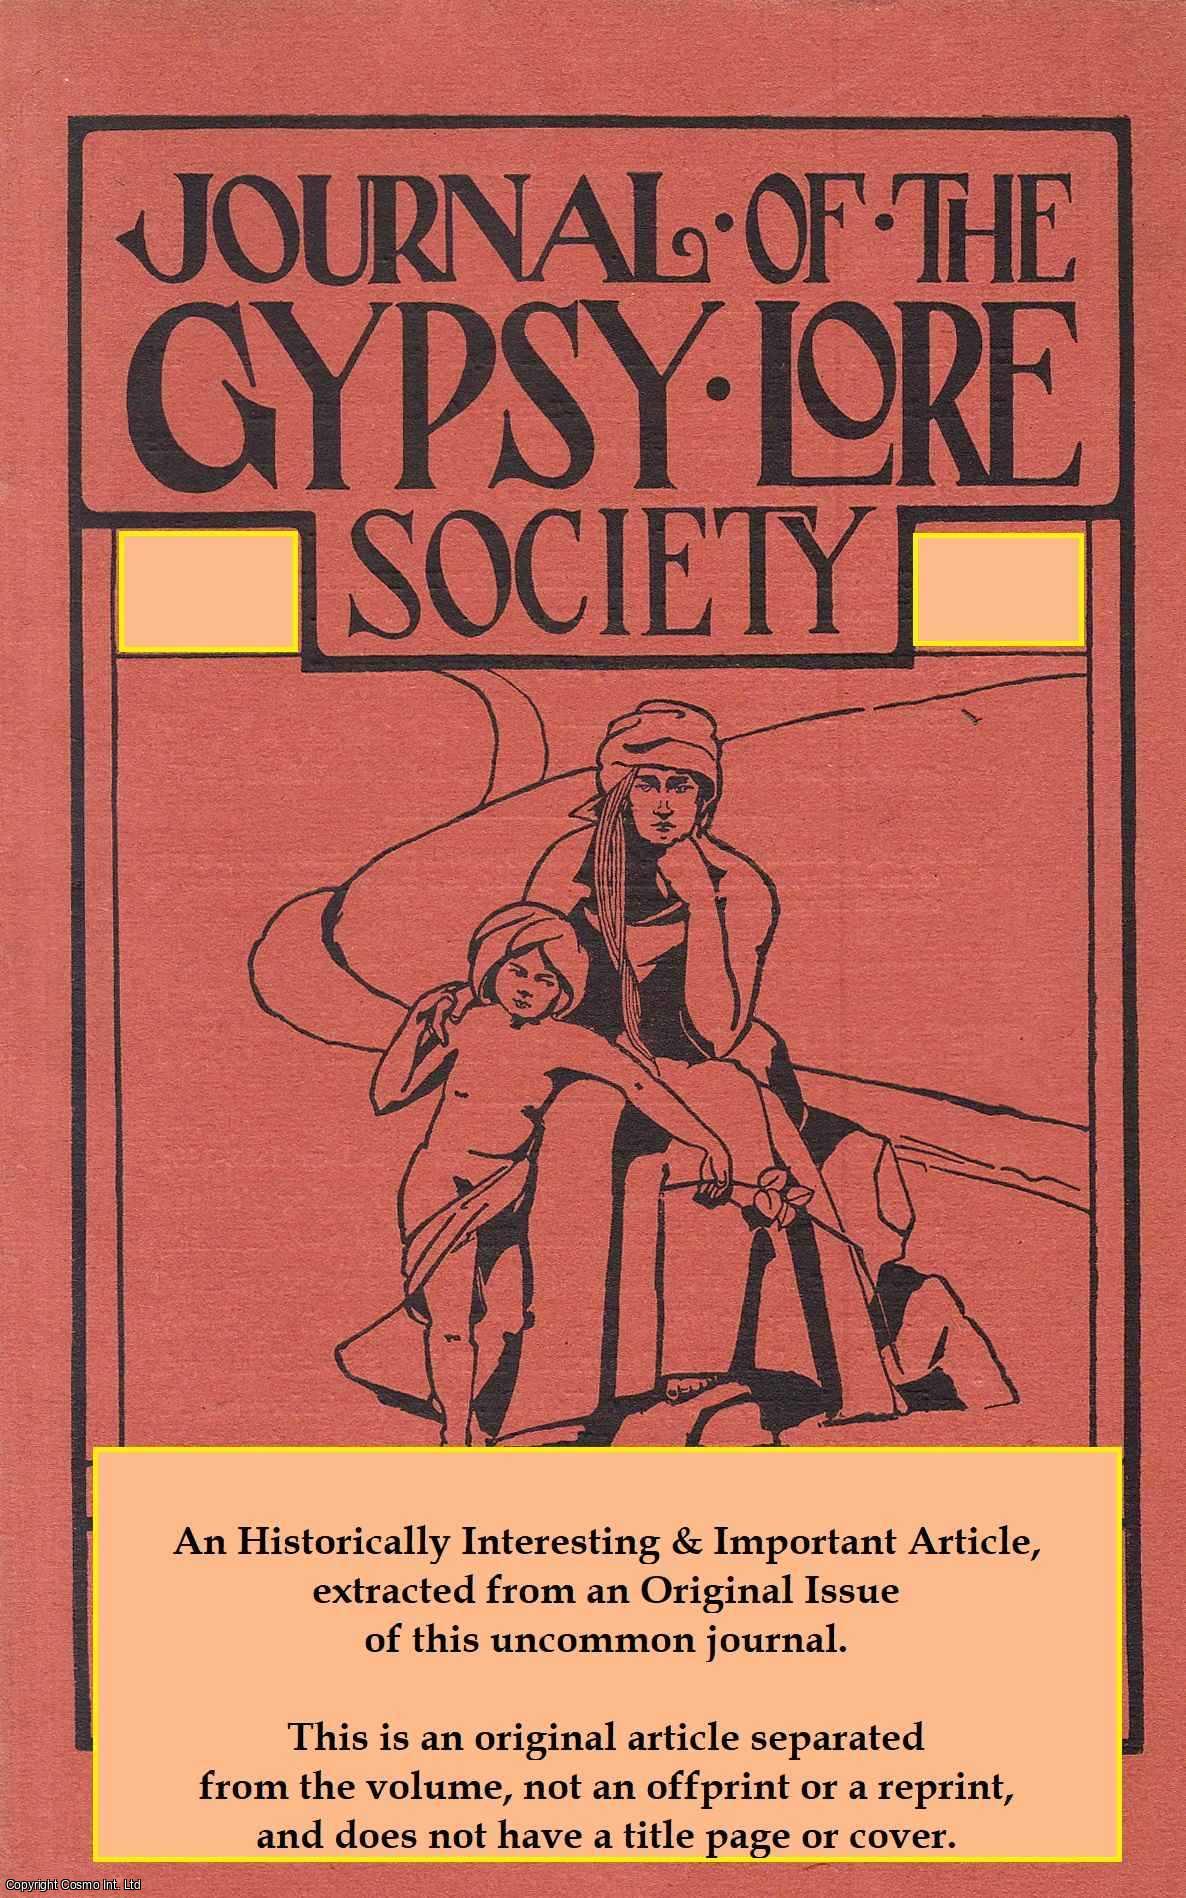 Prof R.L. Turner - A Reply to Dr. J. Sampson on 'The Position of Romani in Indo-Aryan'. An uncommon original article from the Journal of the Gypsy Lore Society, 1927.